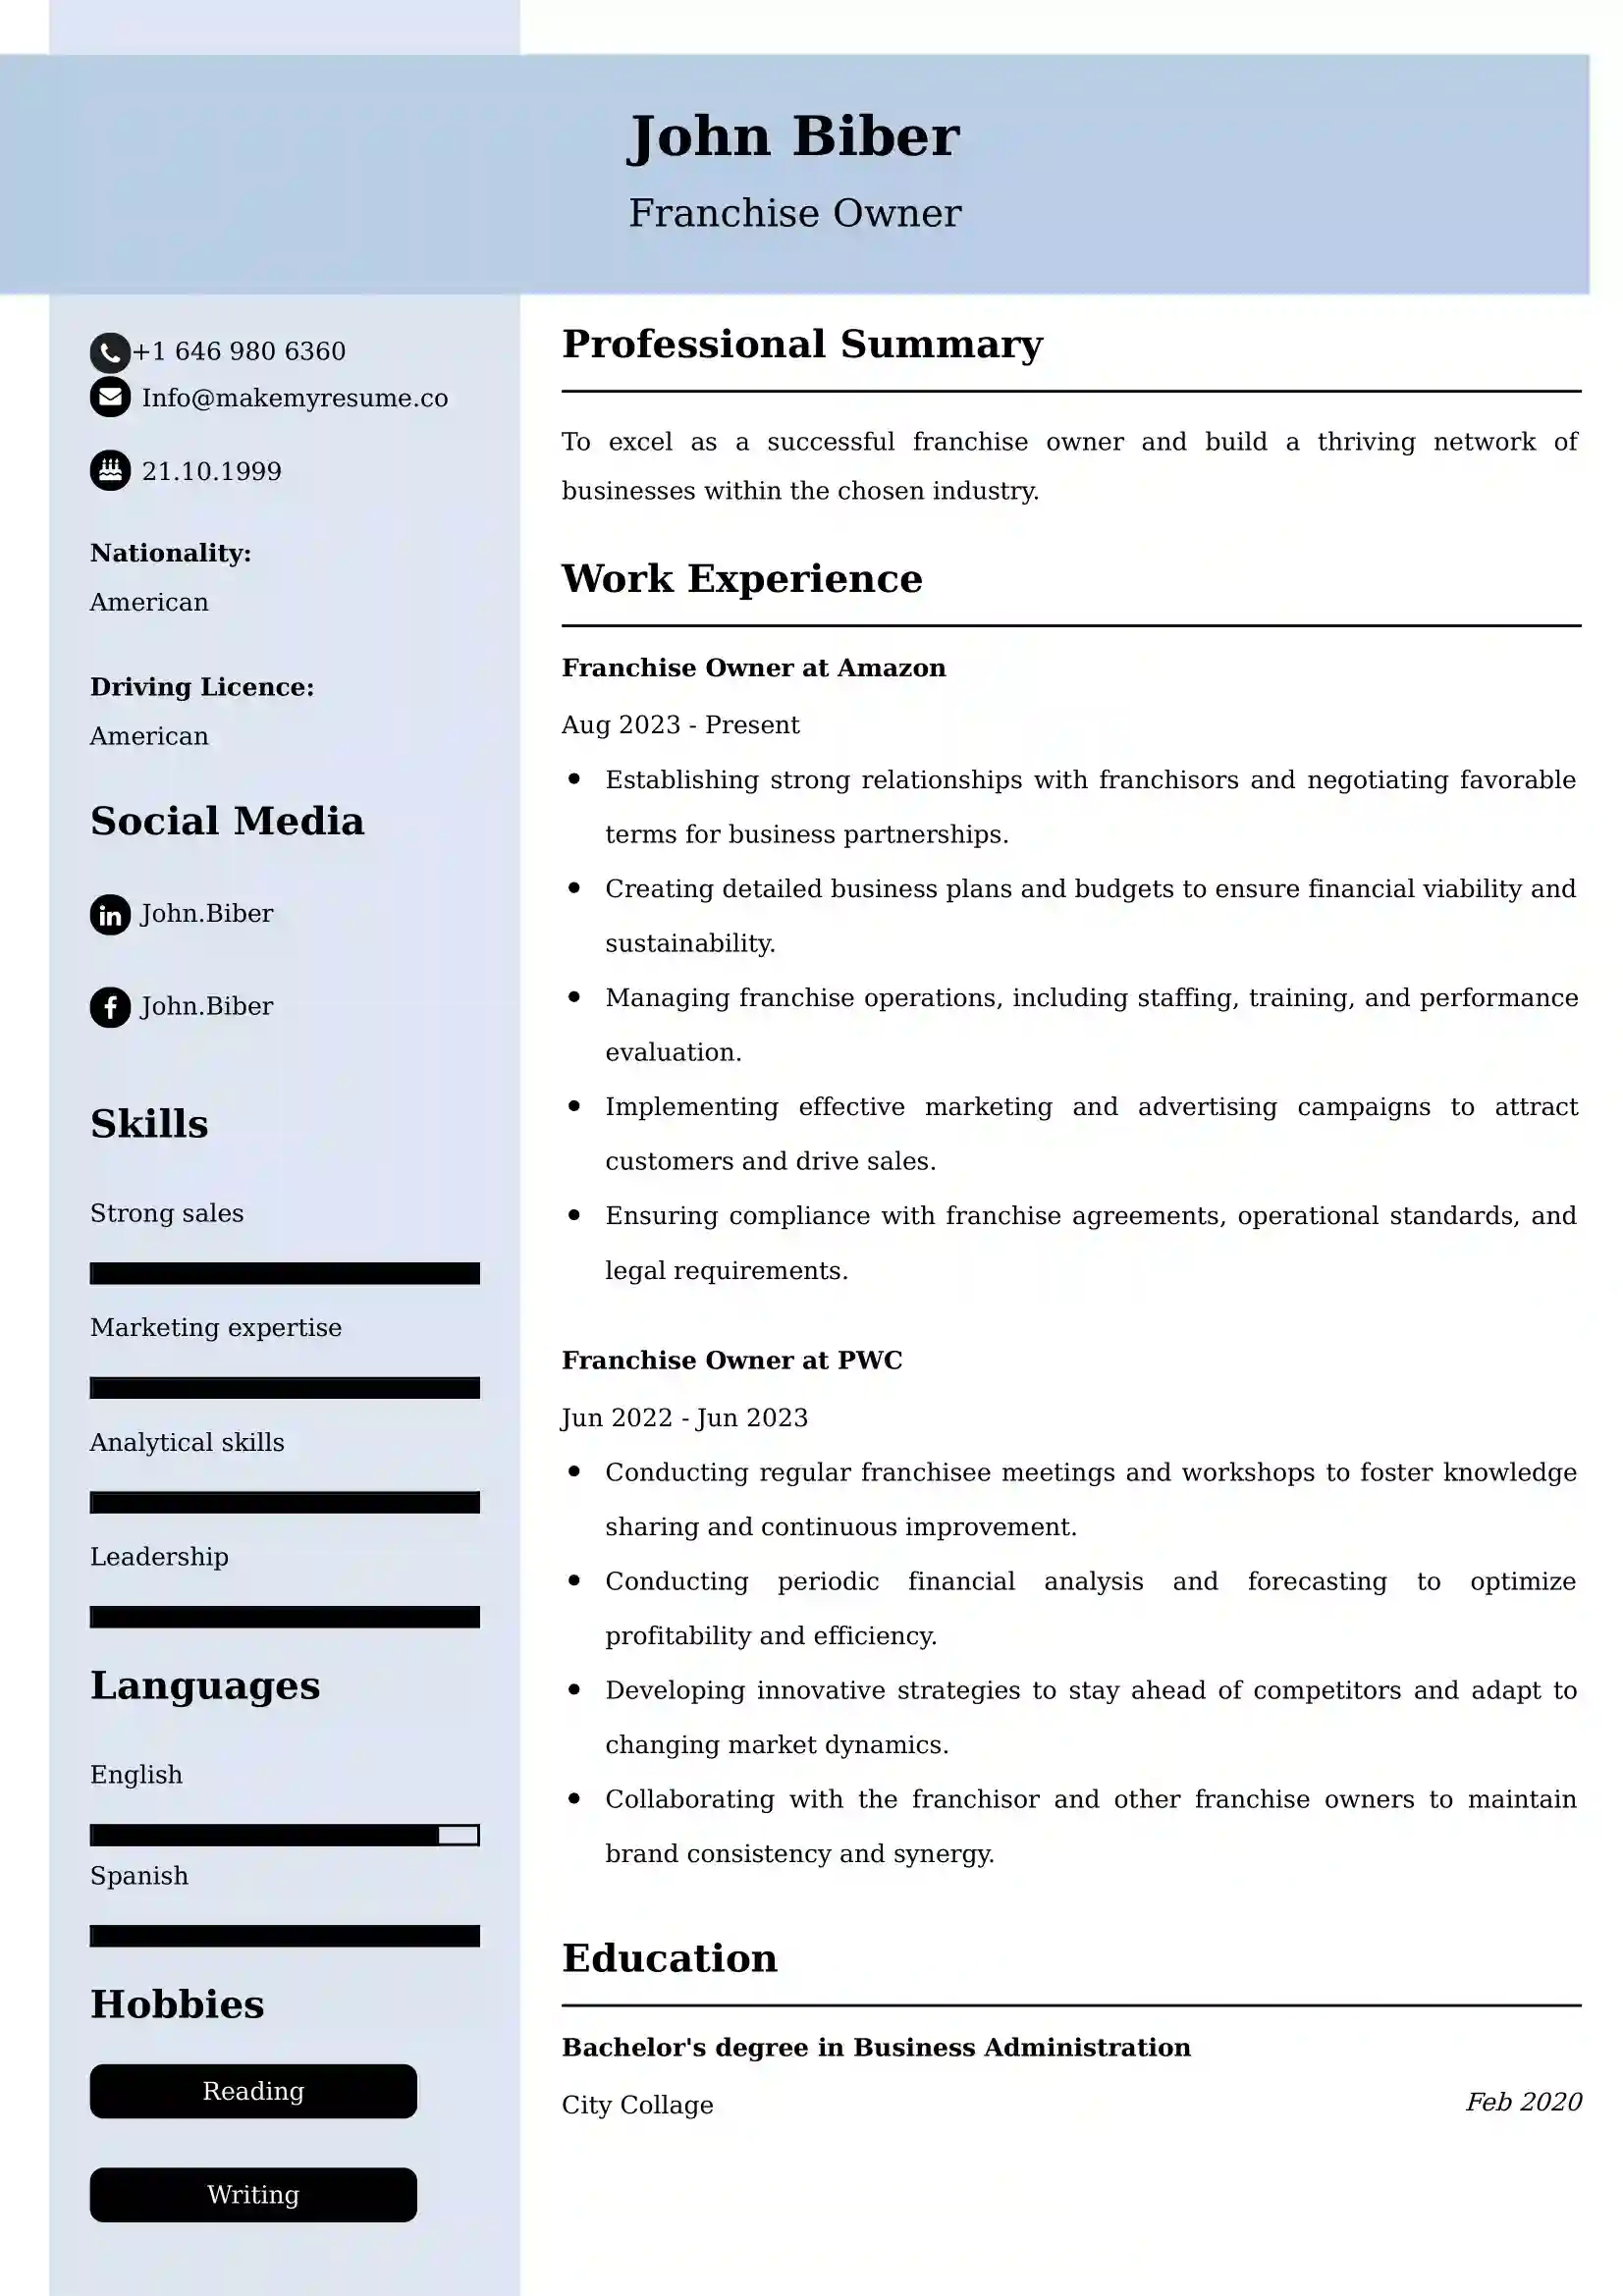 Franchise Owner Resume Examples - Australian Format and Tips